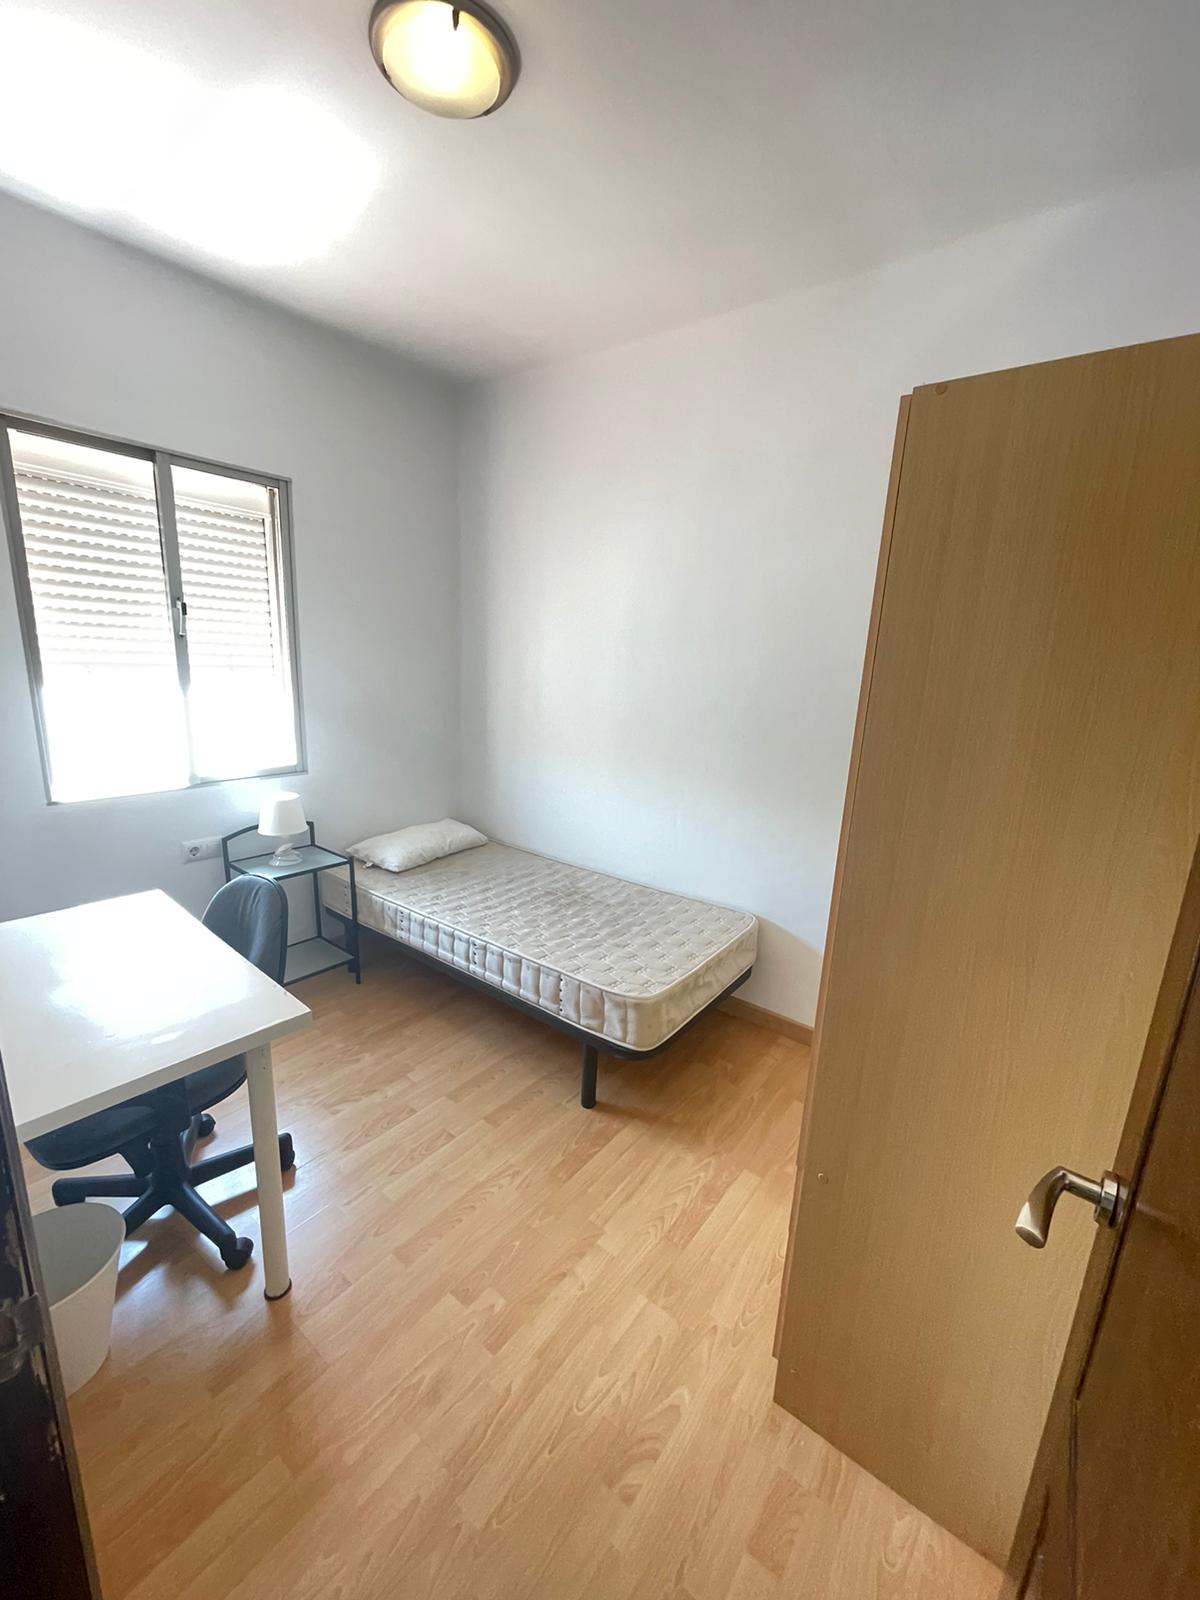 Single room for Erasmus student in Triana